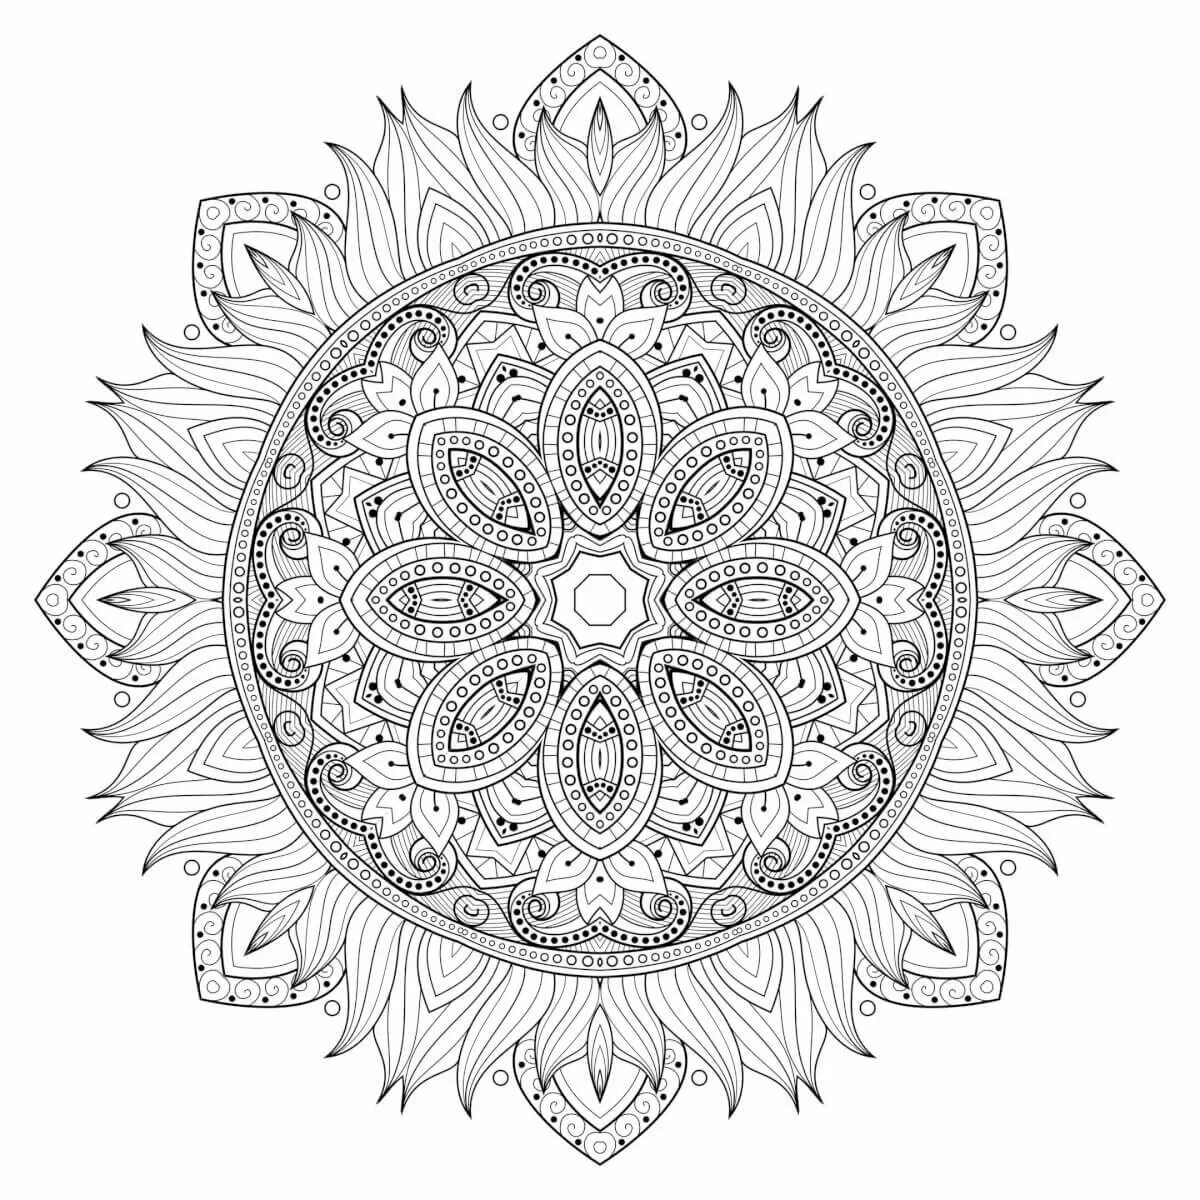 Mysterious coloring meaning of the mandala